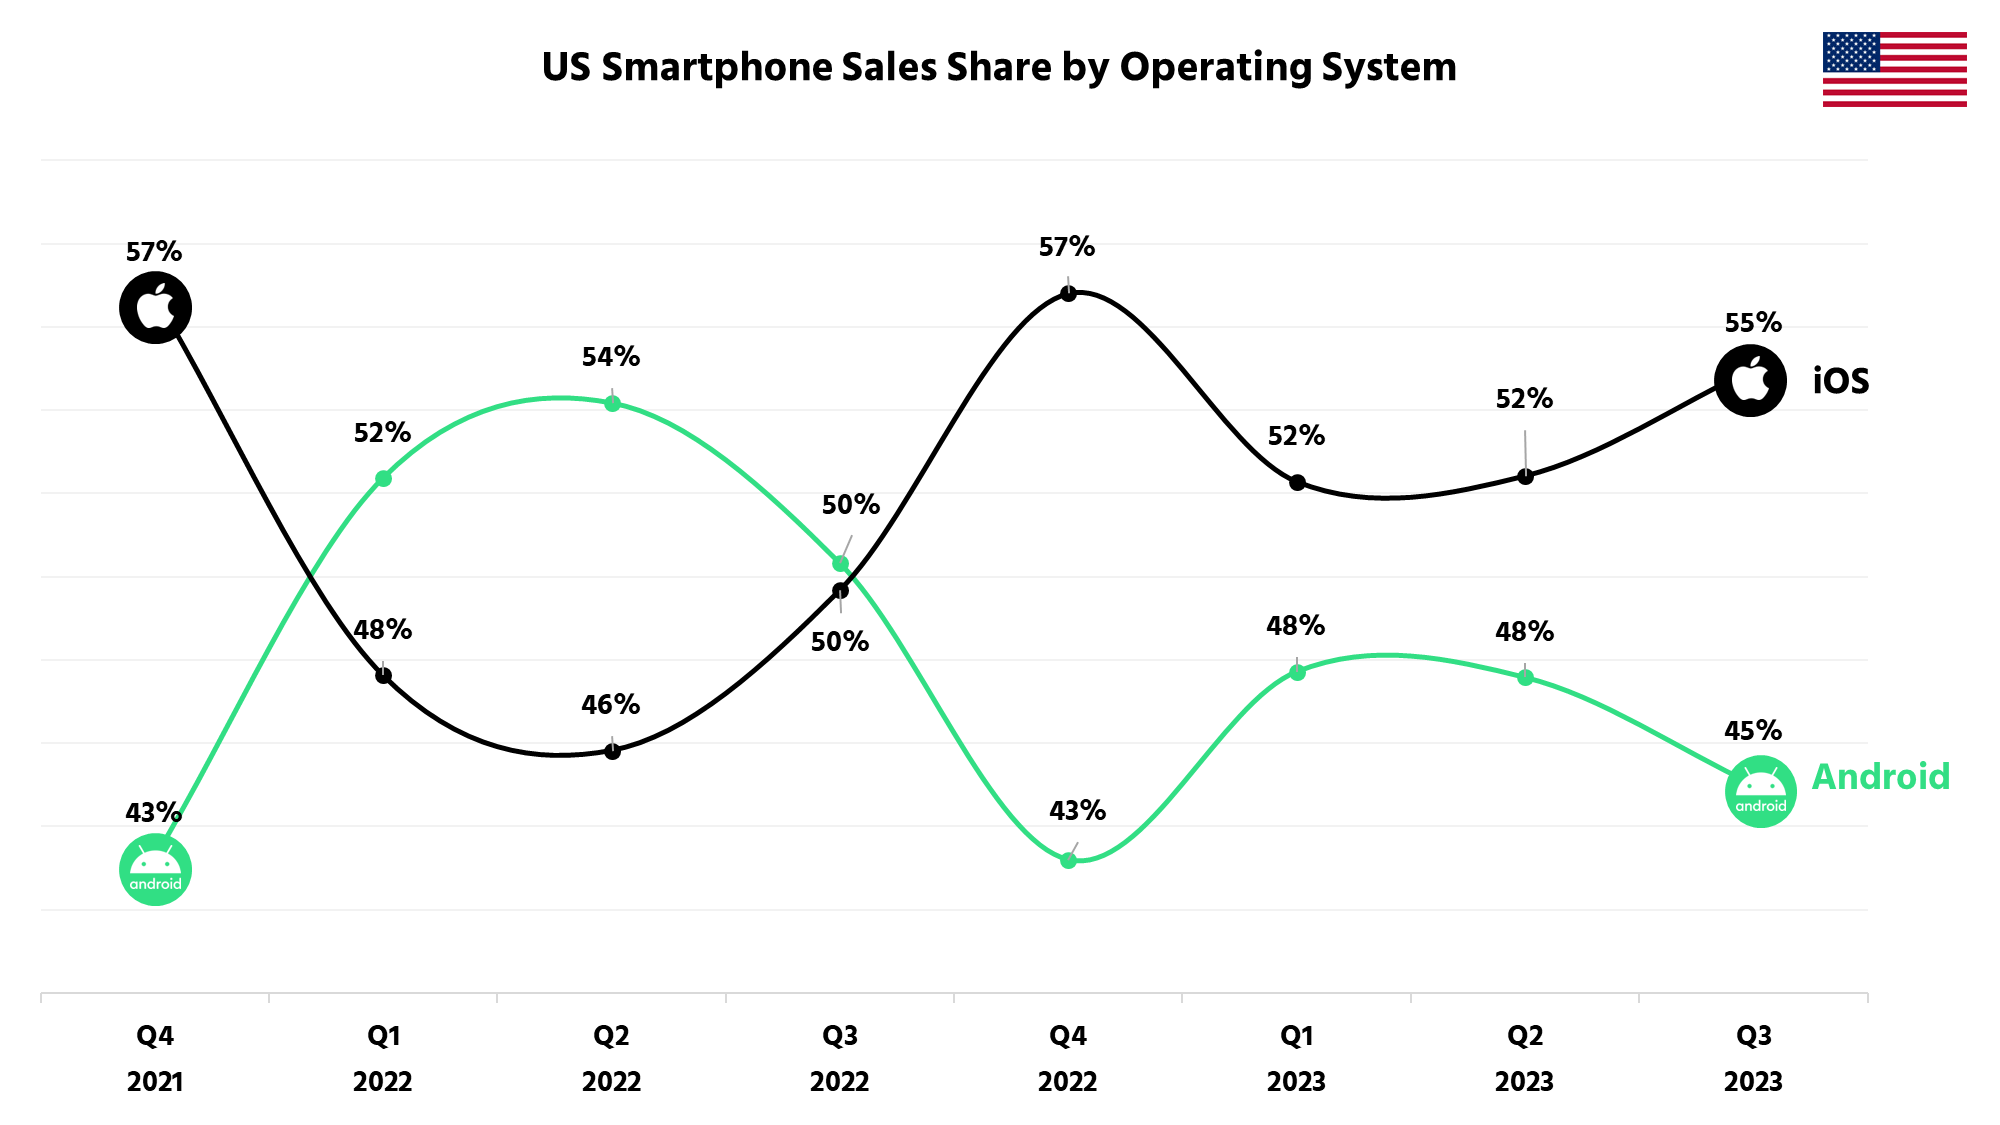 US Smartphone OS Sales Share Q3 2023